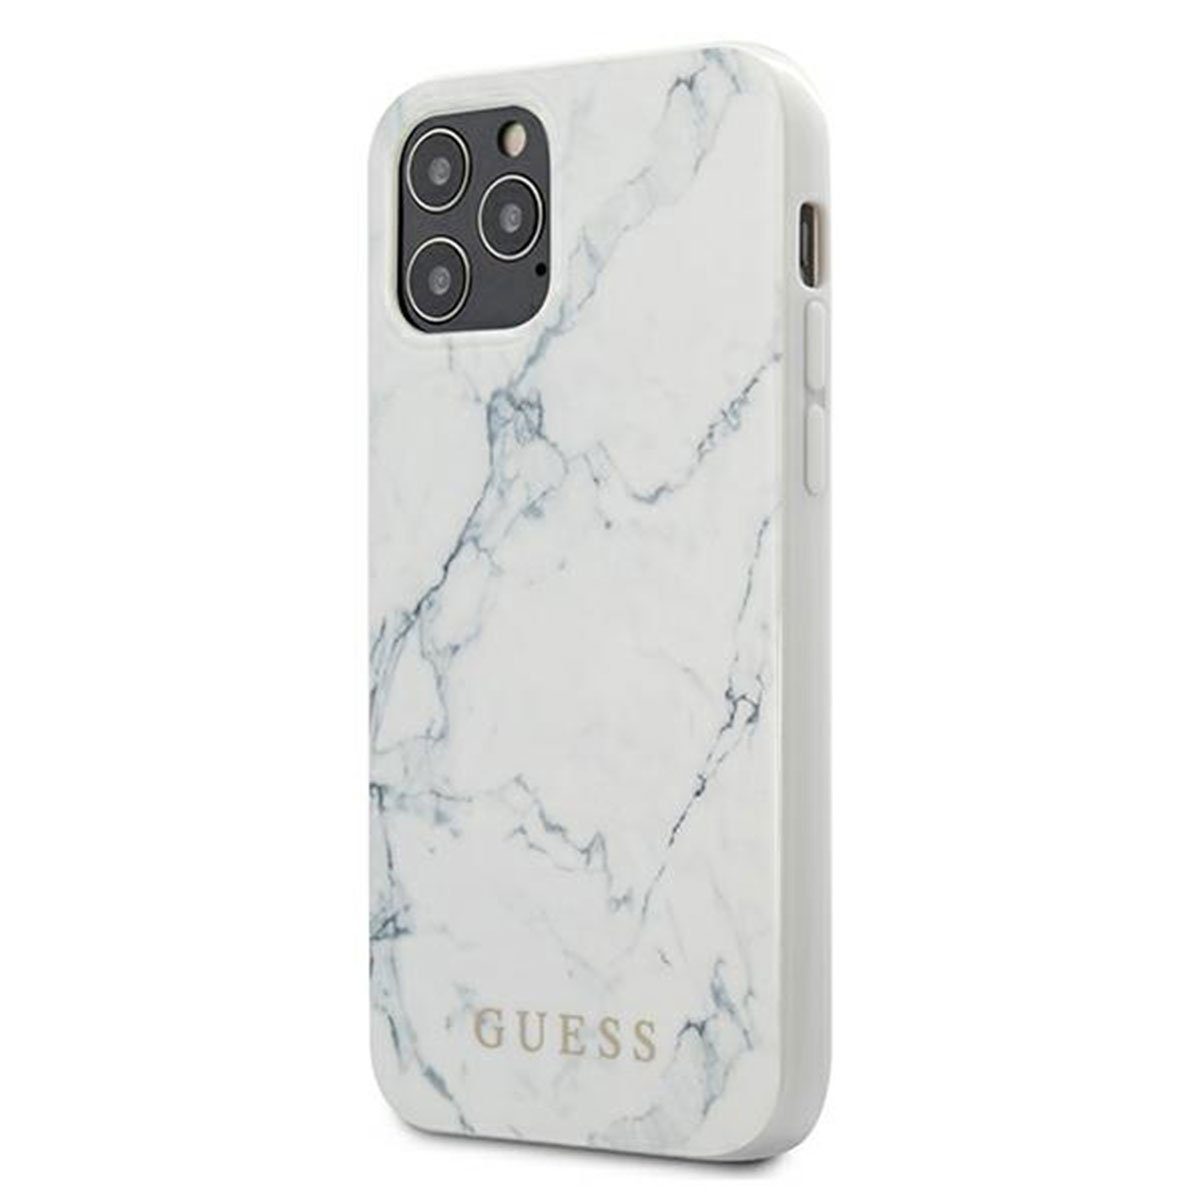 Guess Handyhülle »Guess Marble Collection Apple iPhone 12 Pro Max Weiß  Marmor Hard Case Cover Schutzhülle Etui« online kaufen | OTTO